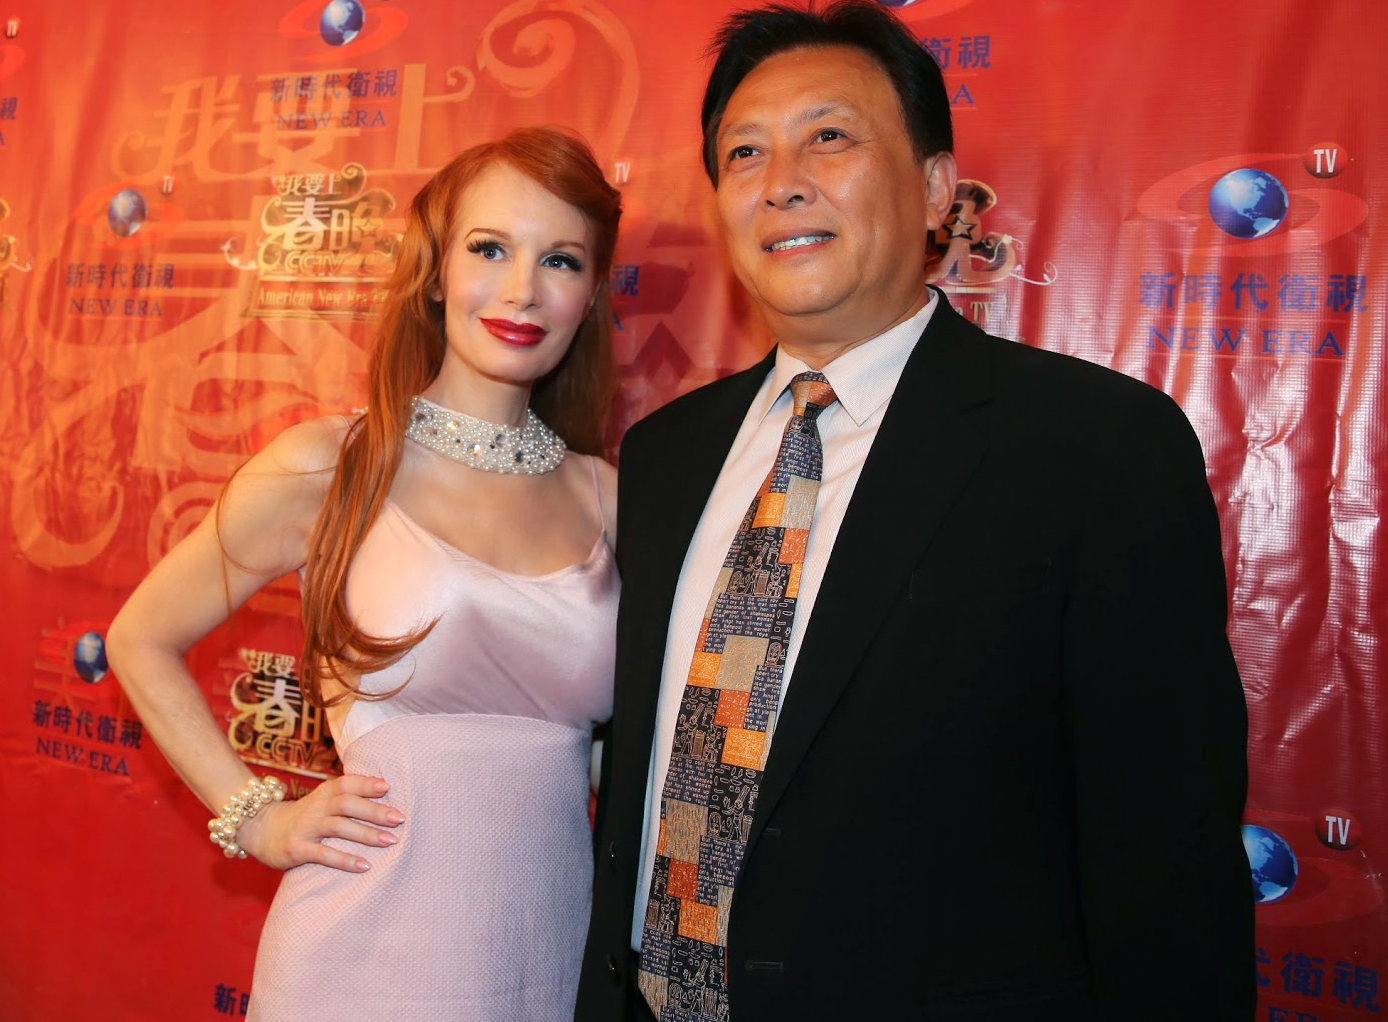 National Judges for CCTV's Chinese New Year Gala - the first time the event was held in the US - Producer Kimberley Kates and China's Mr. Guoqiang Tang at CCTV's event September 7, 2014